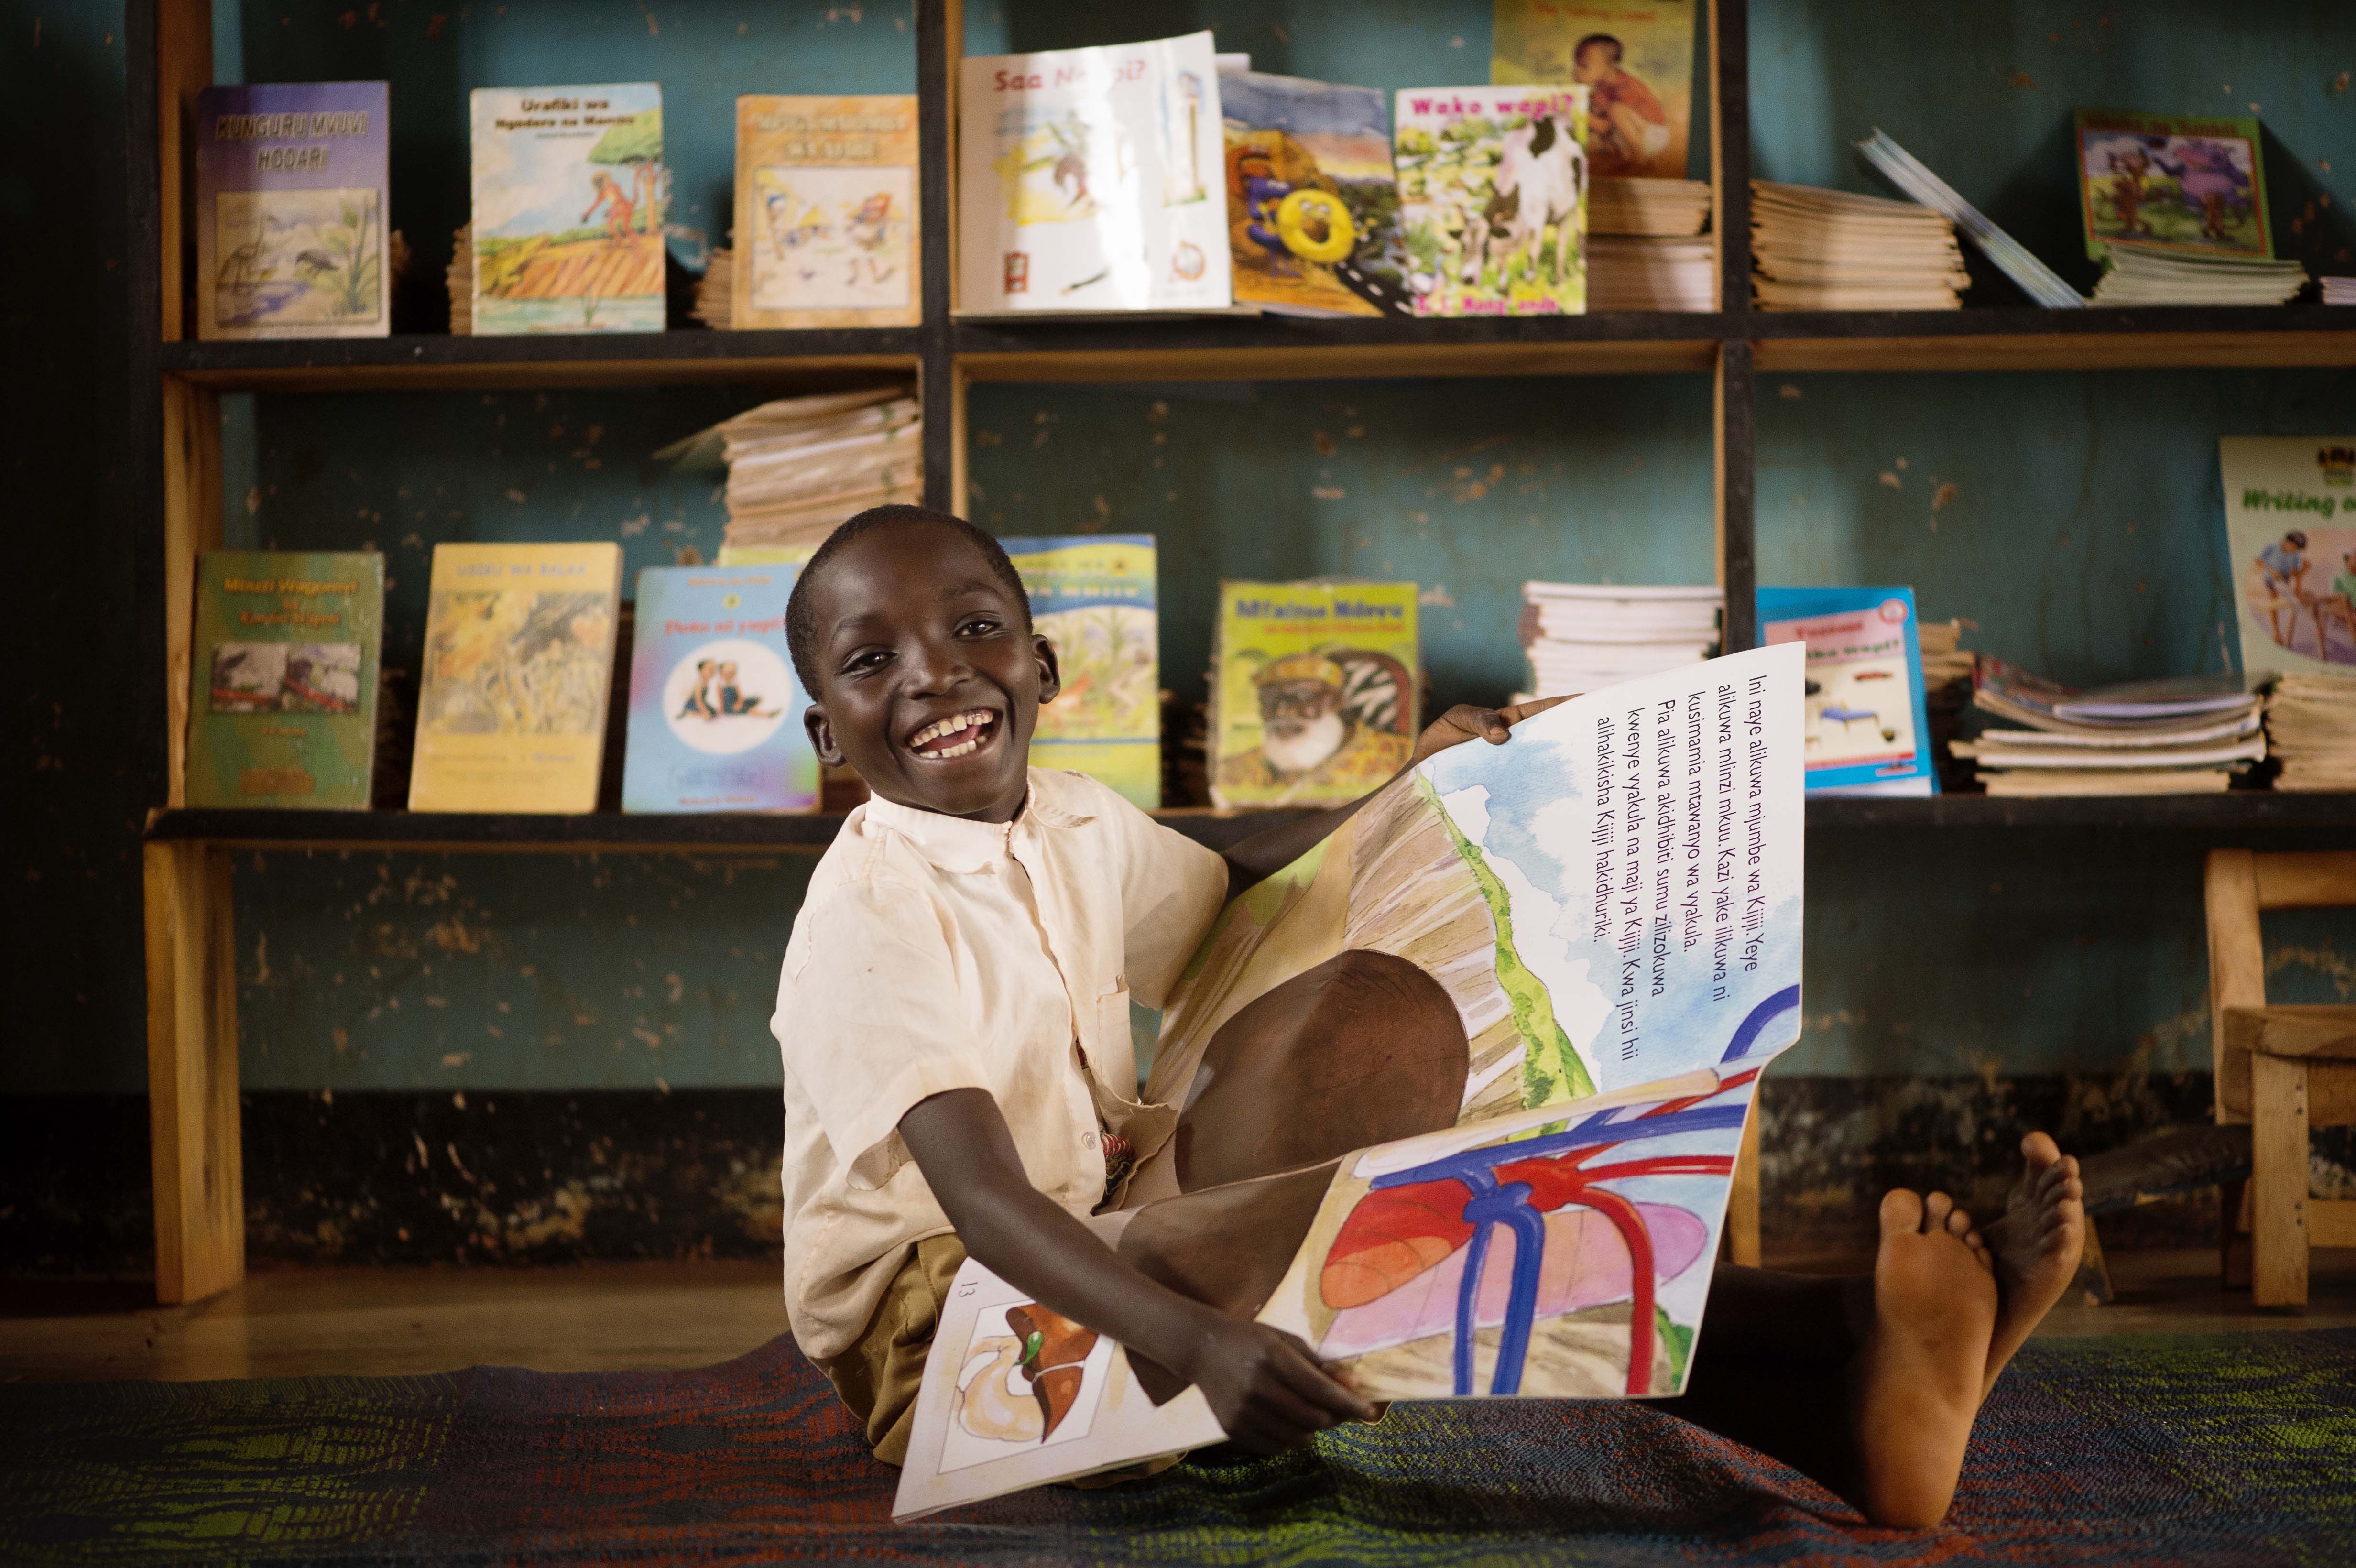 9-year-old Alex Abiaza smiles as he reads a book in the library at the Mlali Primary School, Mlali B Village, Kongwa District, Dodoma Region, Tanzania – 11th November 2015